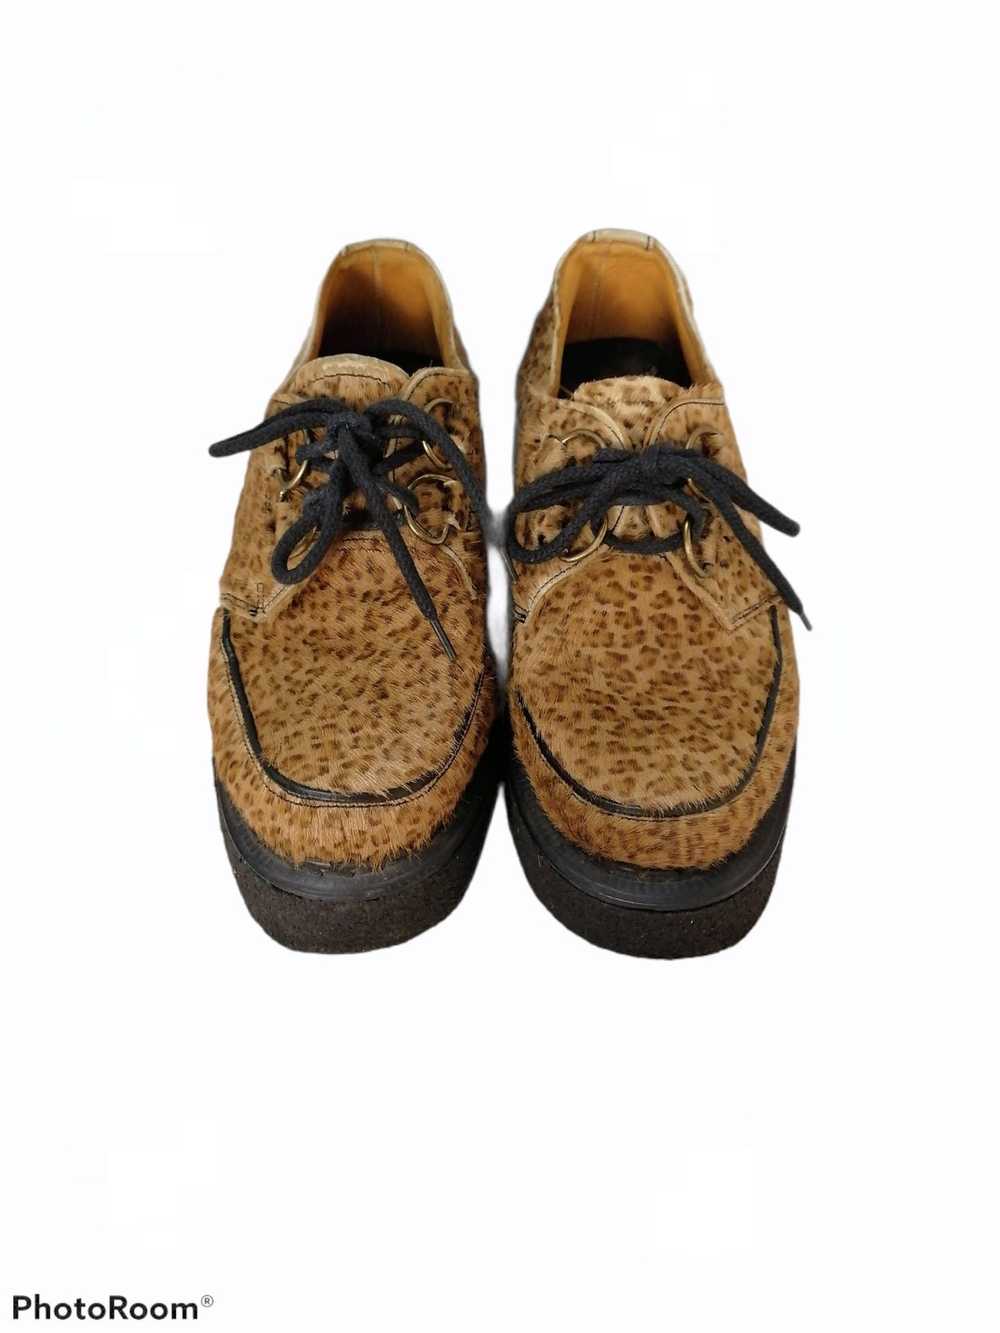 George Cox Leopard Printed Robot Shoes - image 2